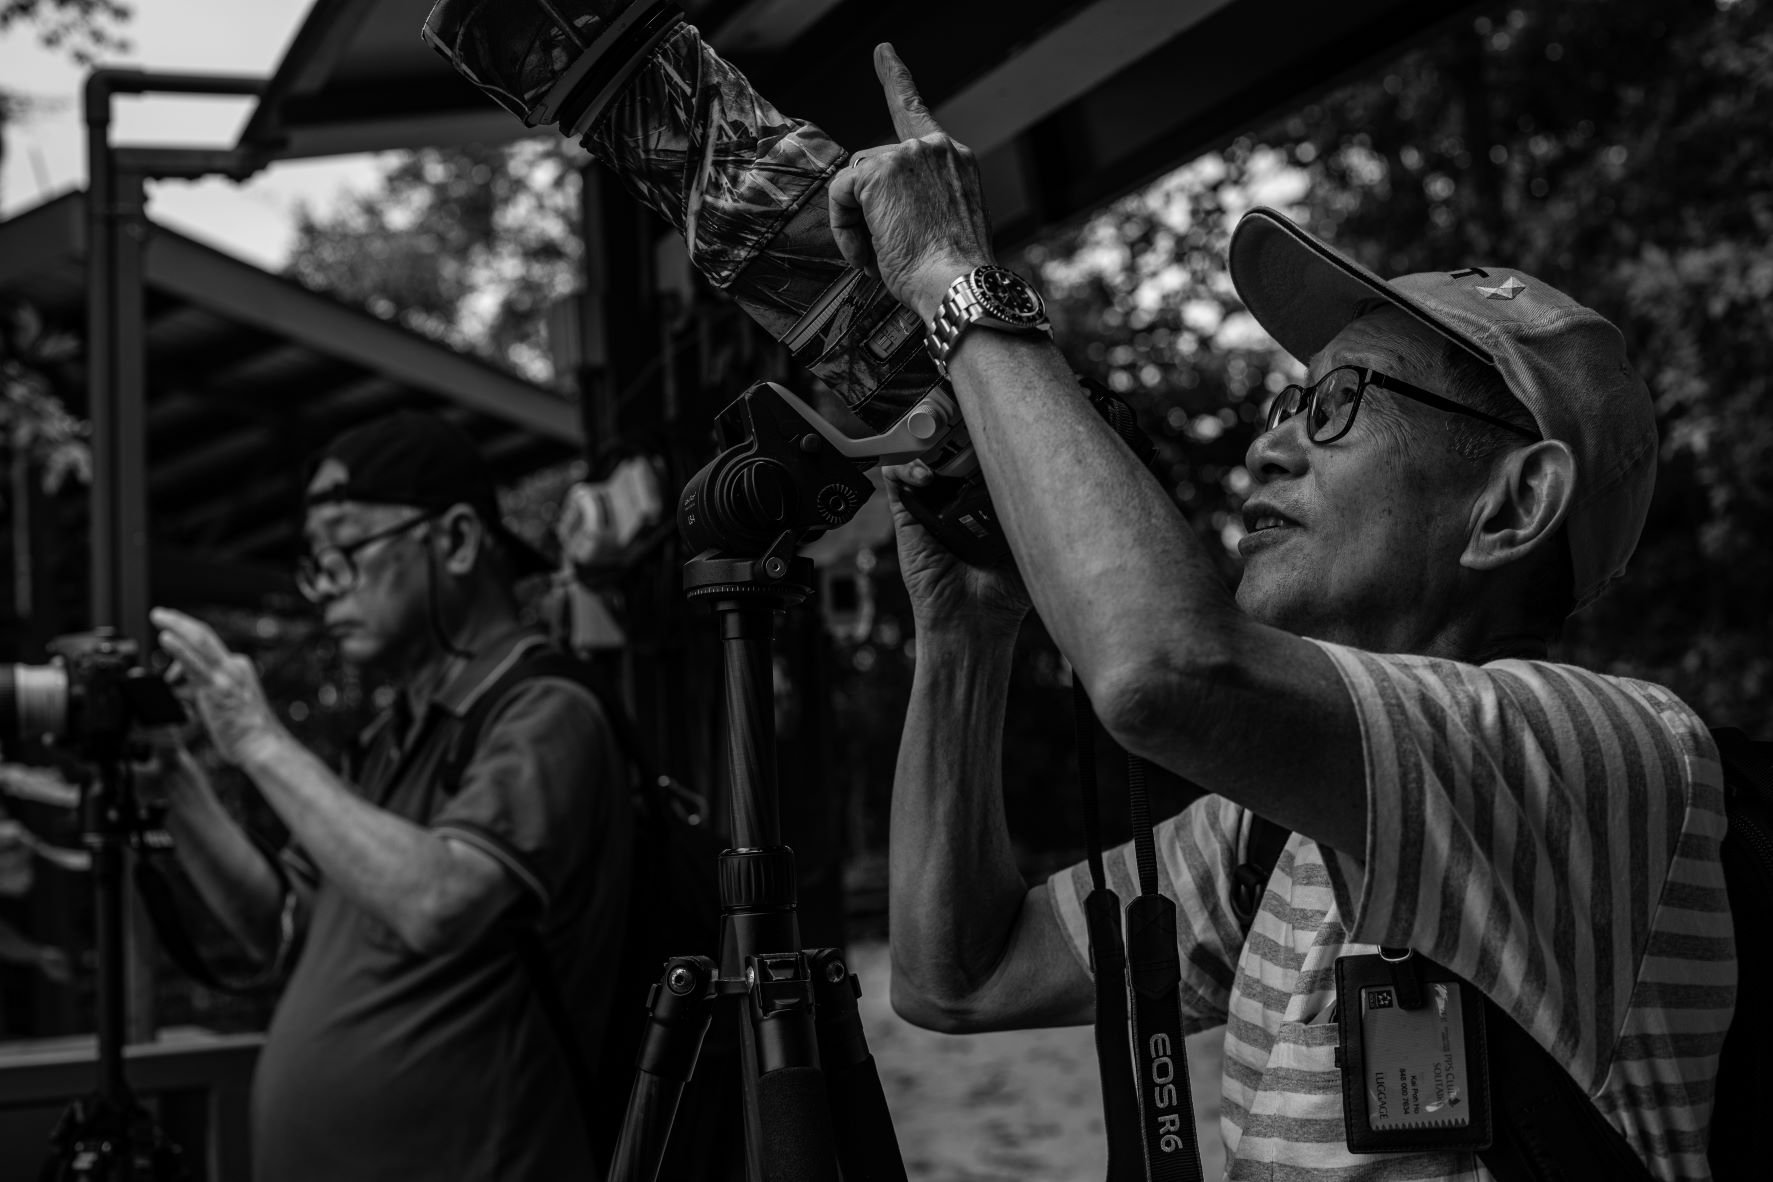  Birders KP (right) and Charles (left) spend 2 to 3 days a month photographing shorebirds at Sungei Buloh Wetlands in Singapore. 